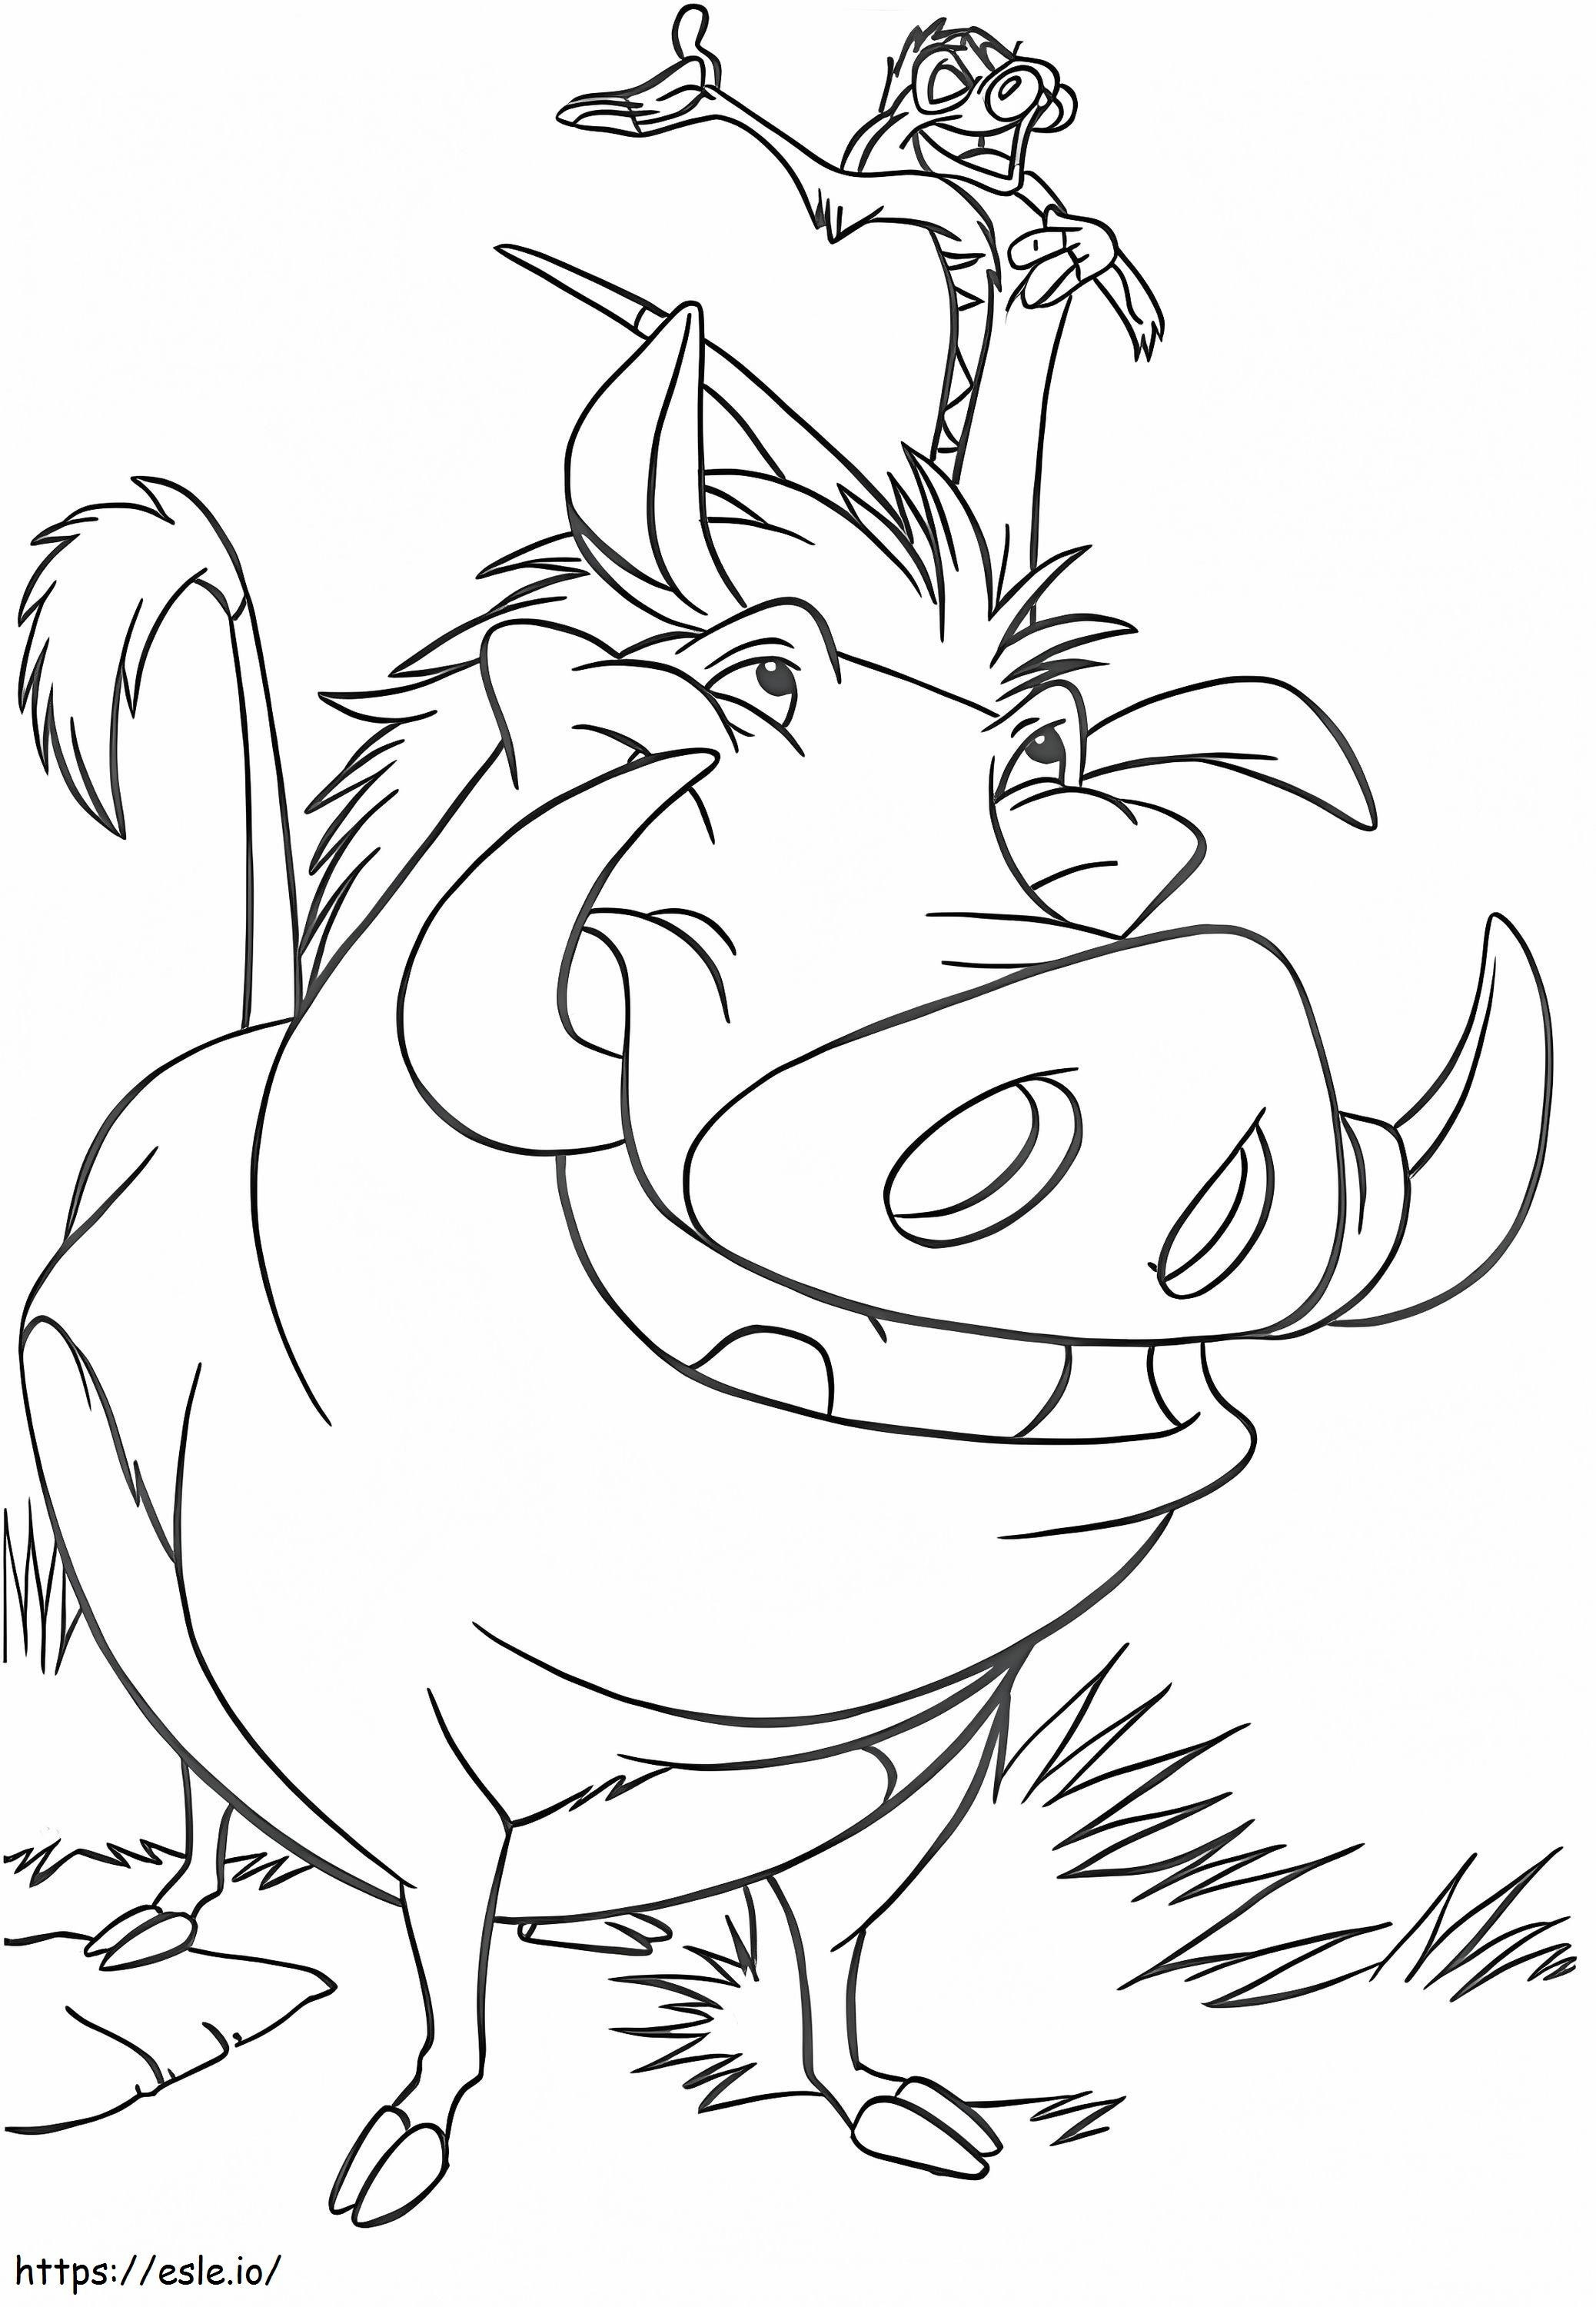 1560501614 Pumbaa And Timon A4 coloring page